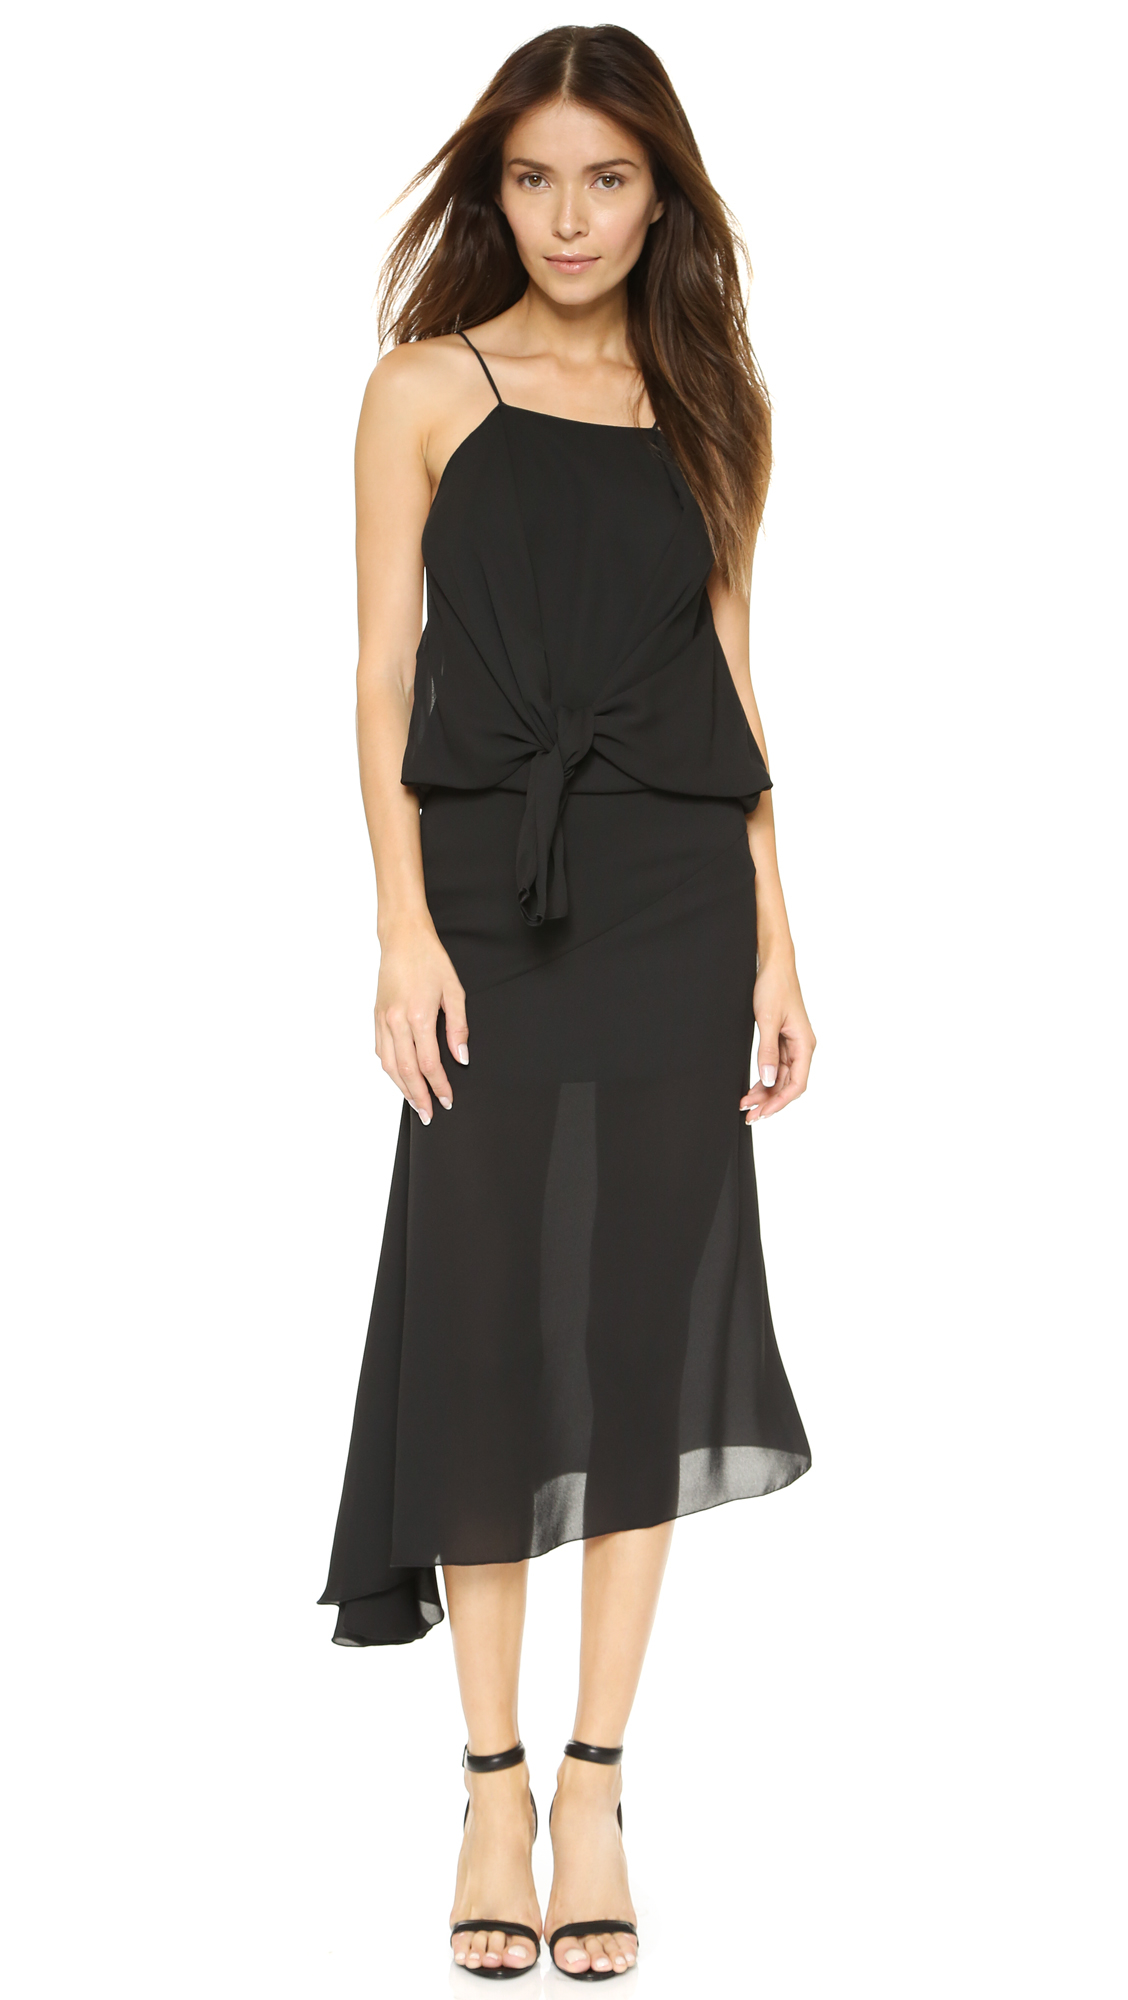 Lyst - Alice Mccall The Way You Fell In Love Dress in Black